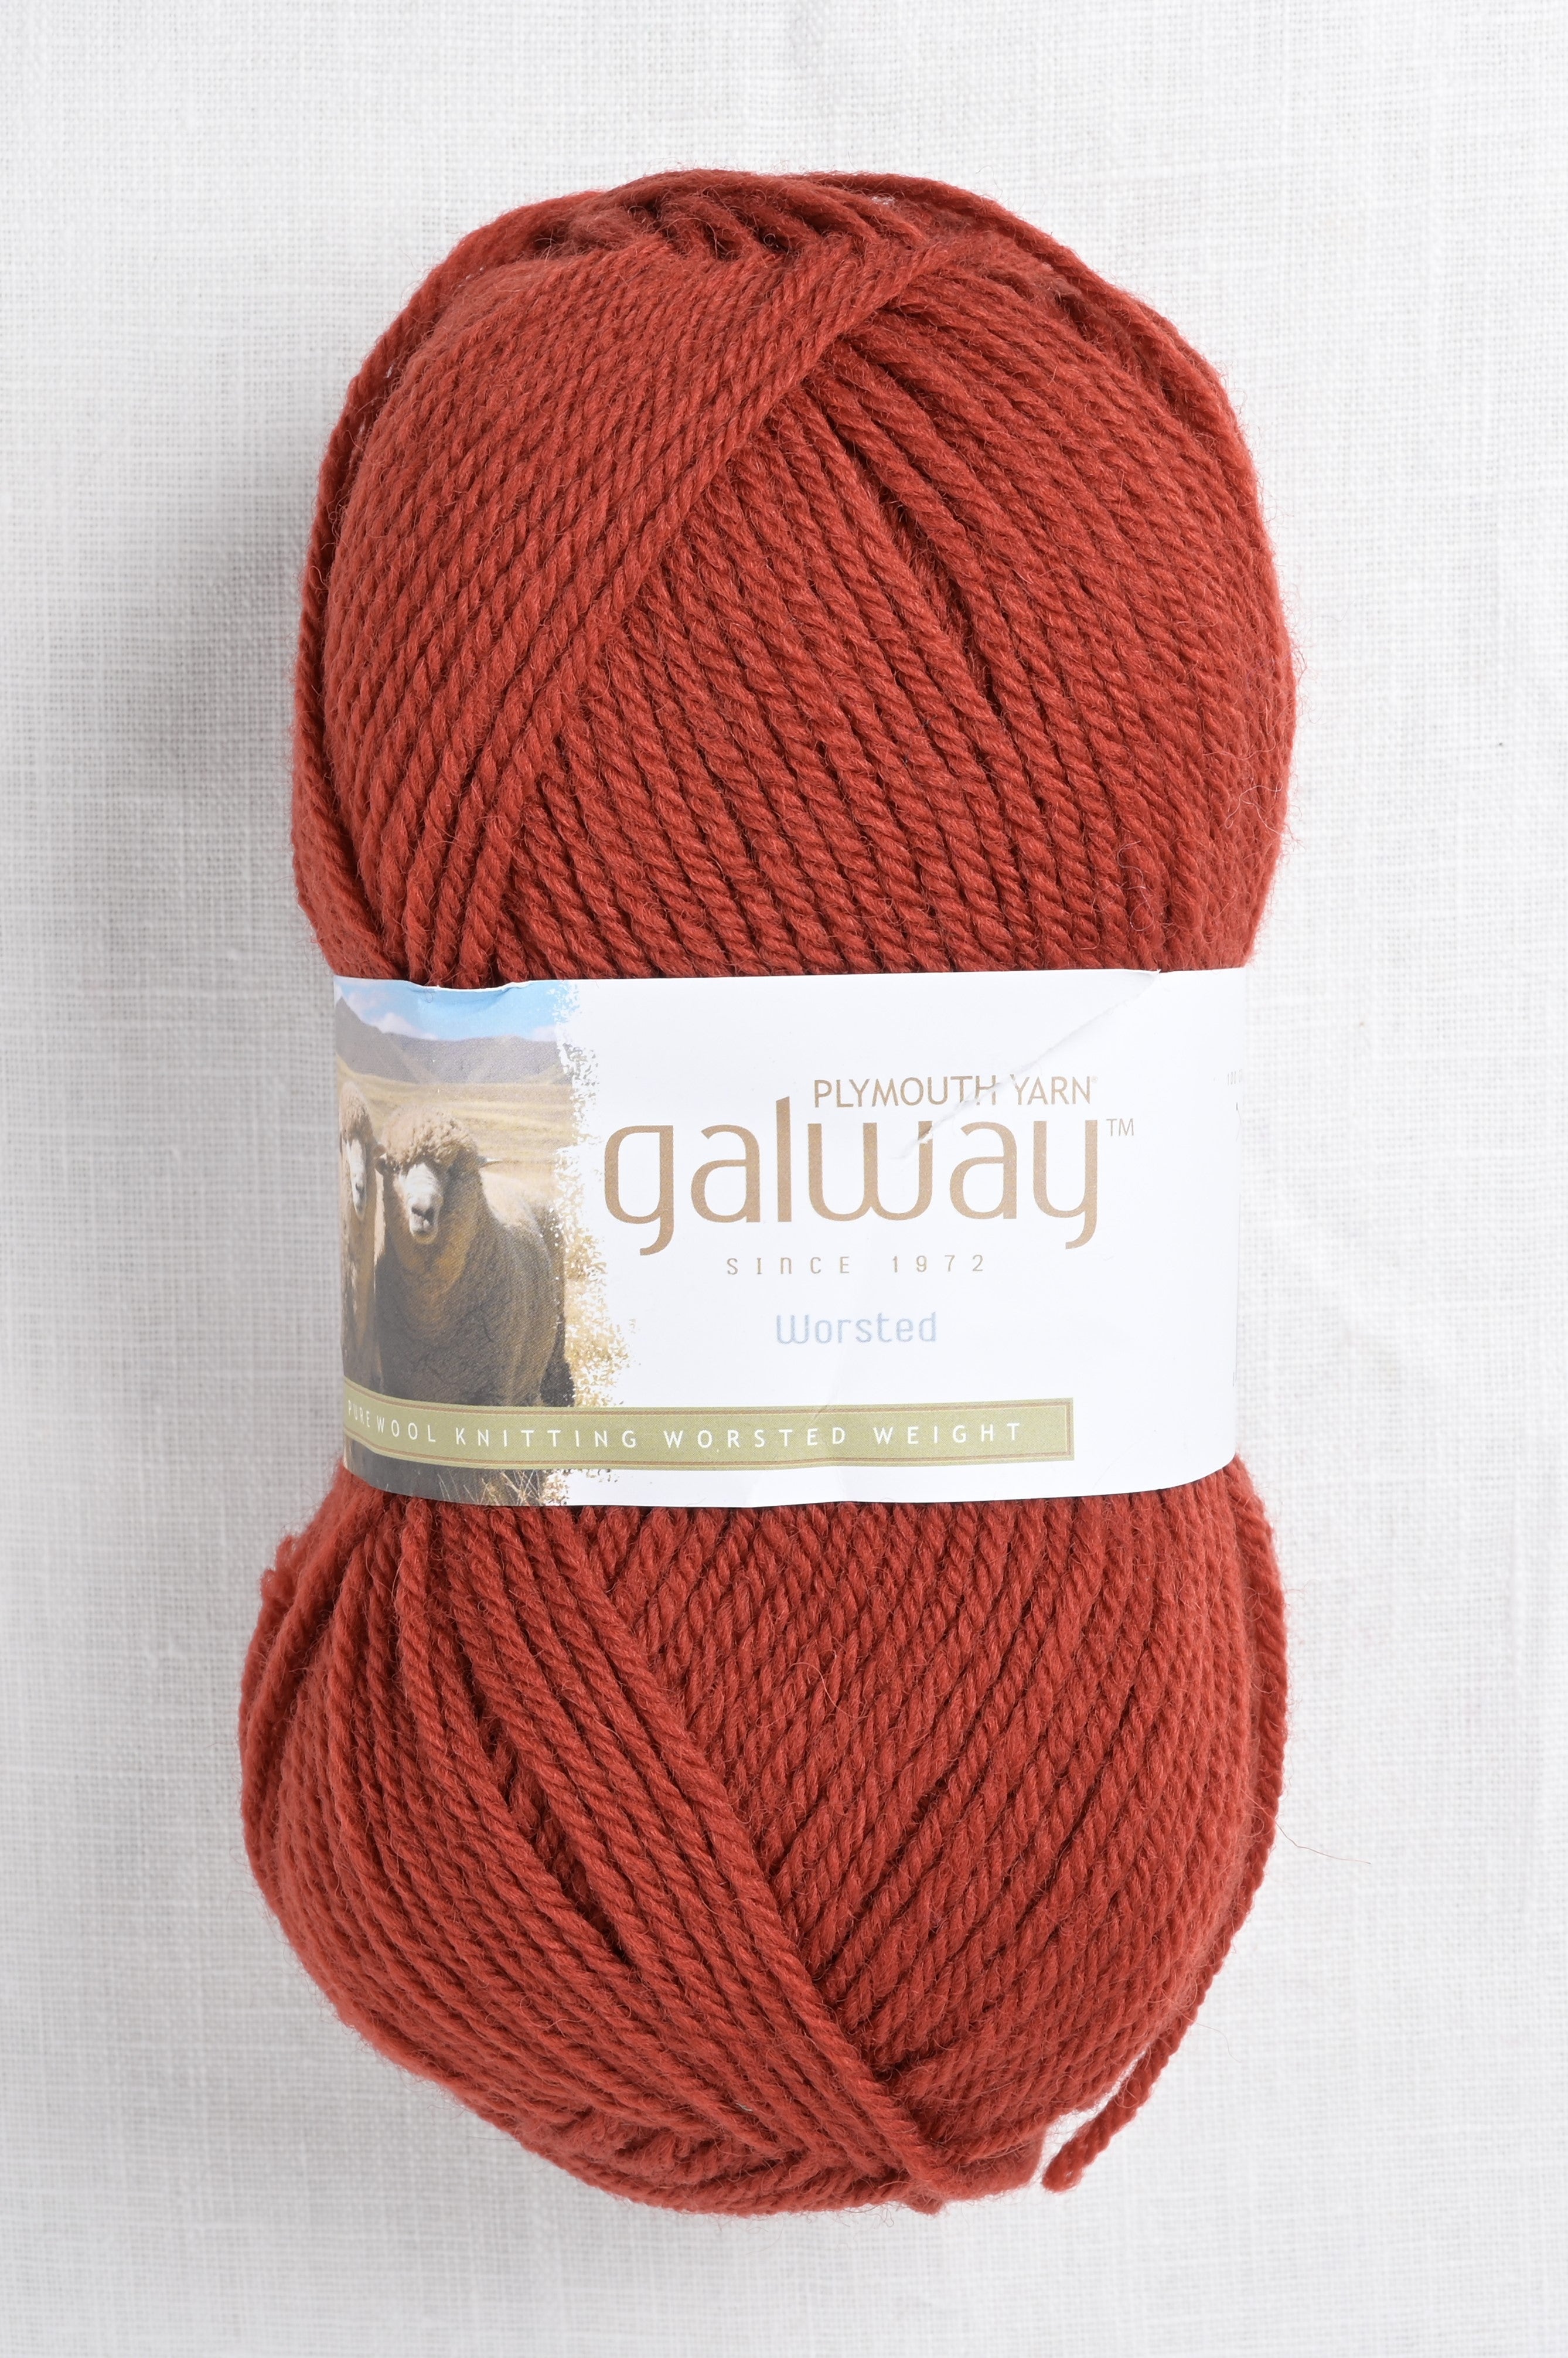 Plymouth Yarn - Galway Worsted 100% Wool - Color 126, Lot 65724 - light  Brown